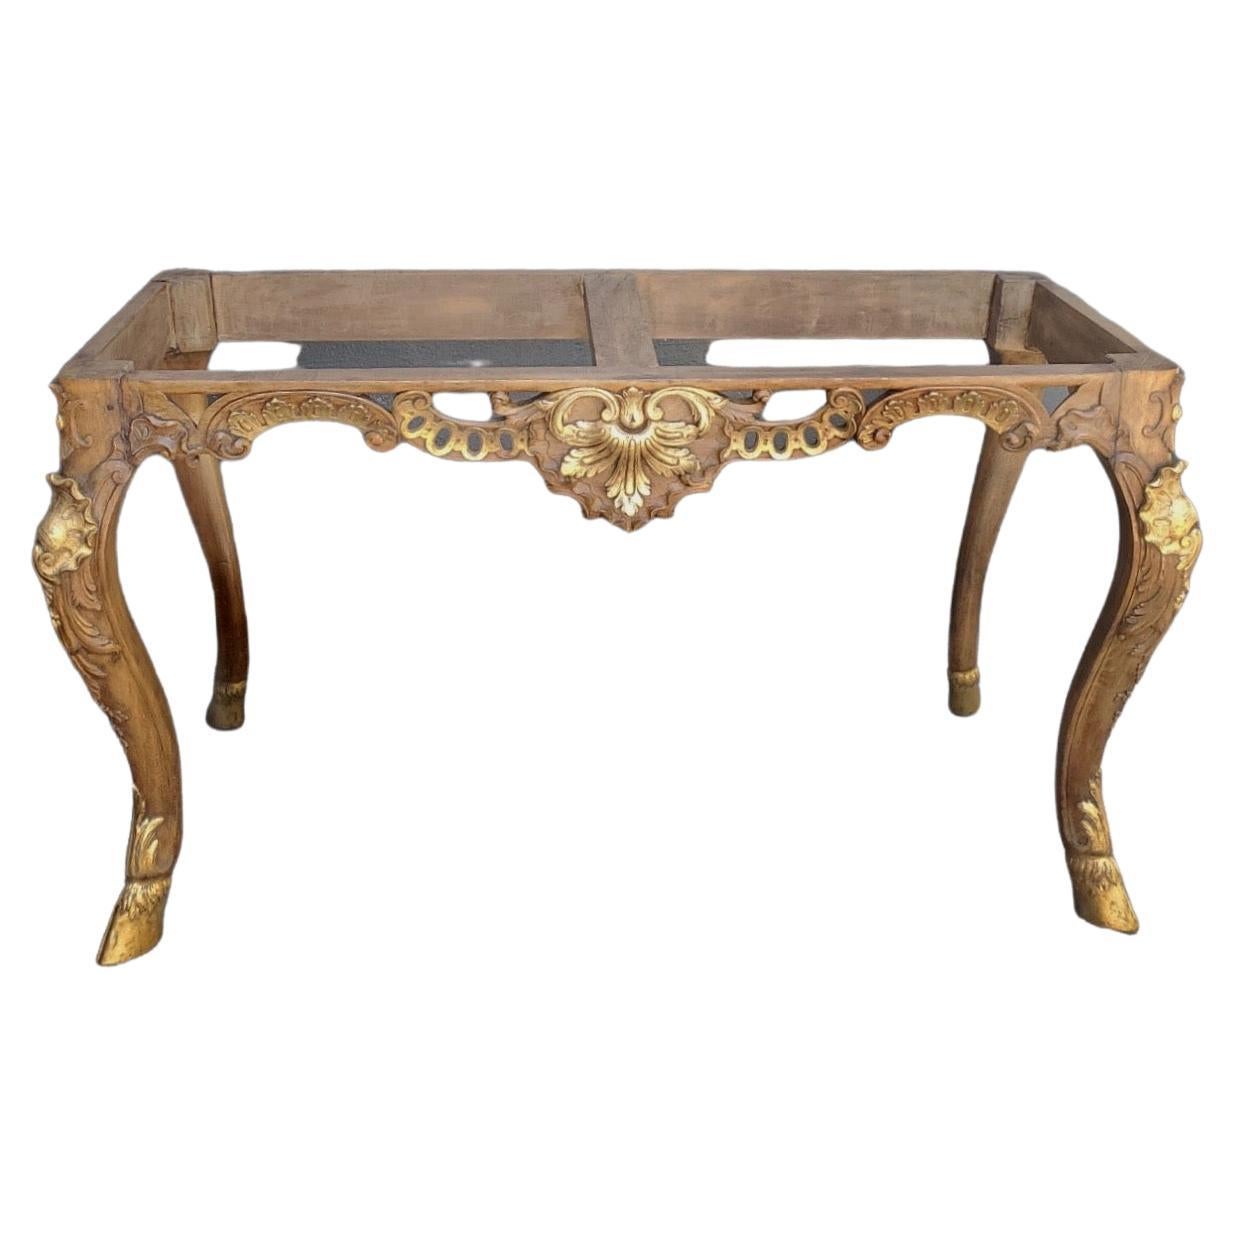 Finely-carved 19th Century French console with giltwood details. Hoofed feet. Marble top is original.